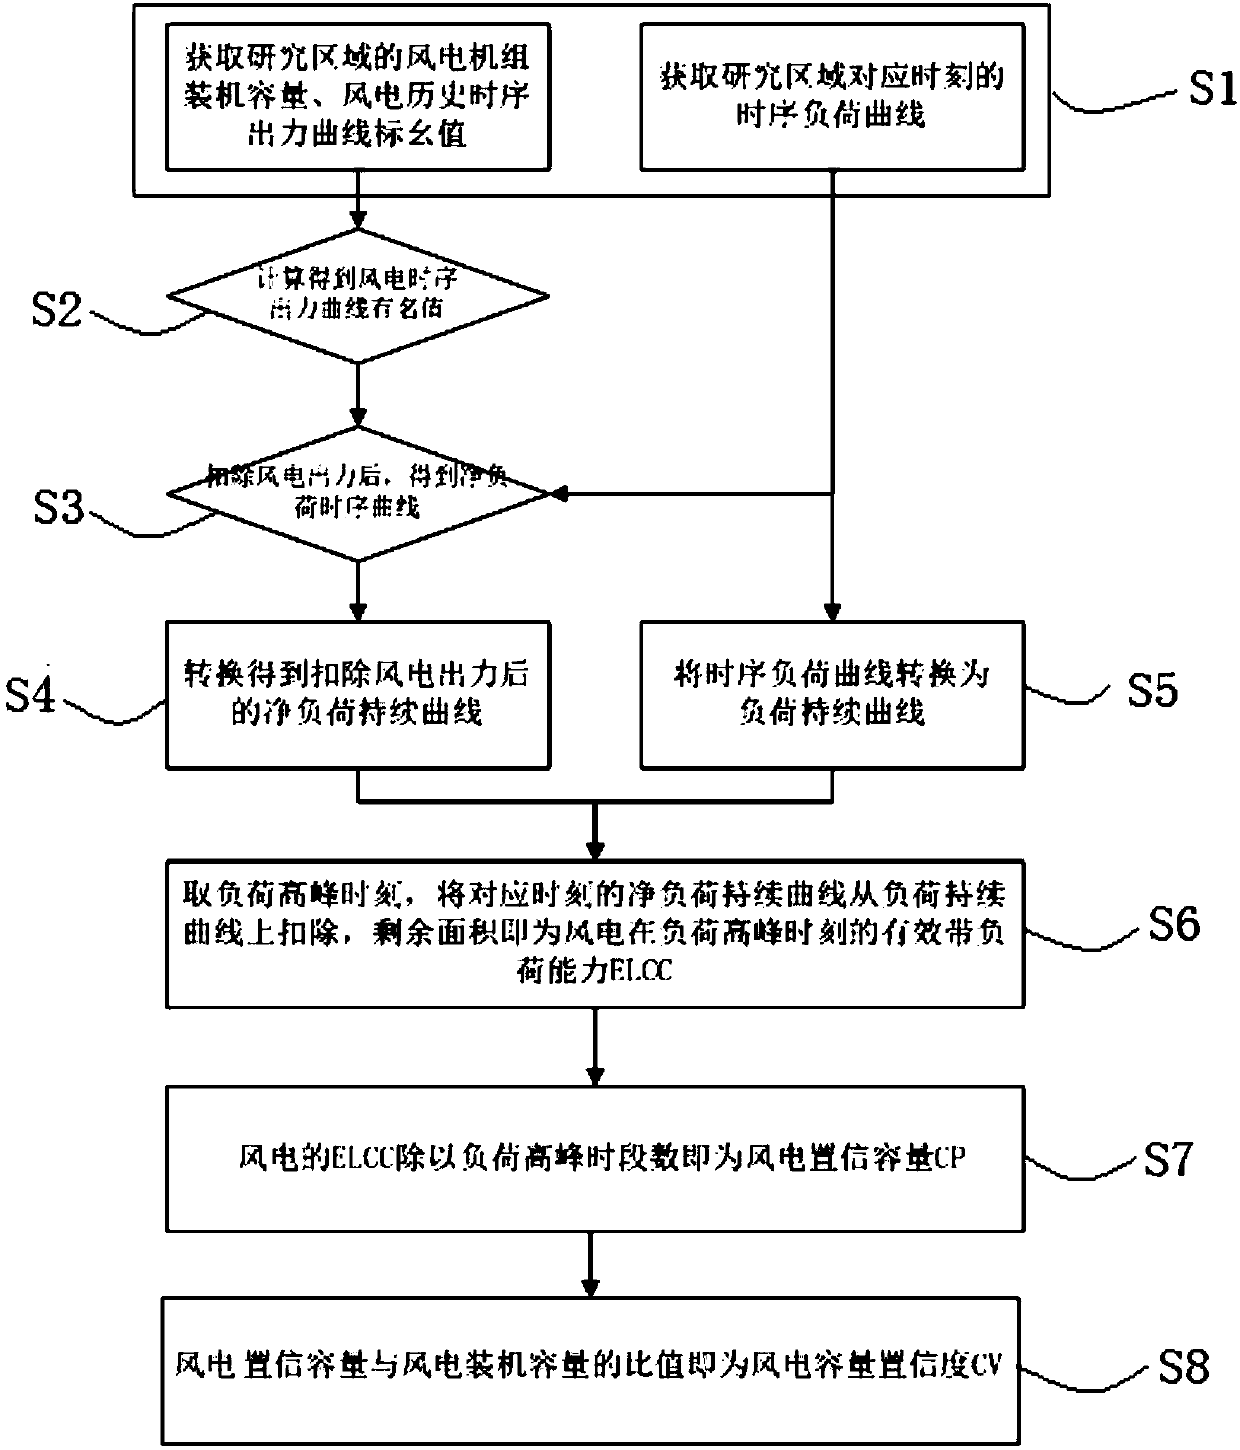 Wind power confidence capacity value (CV) evaluation method suitable for use in high-wind-power-penetration-rate power system